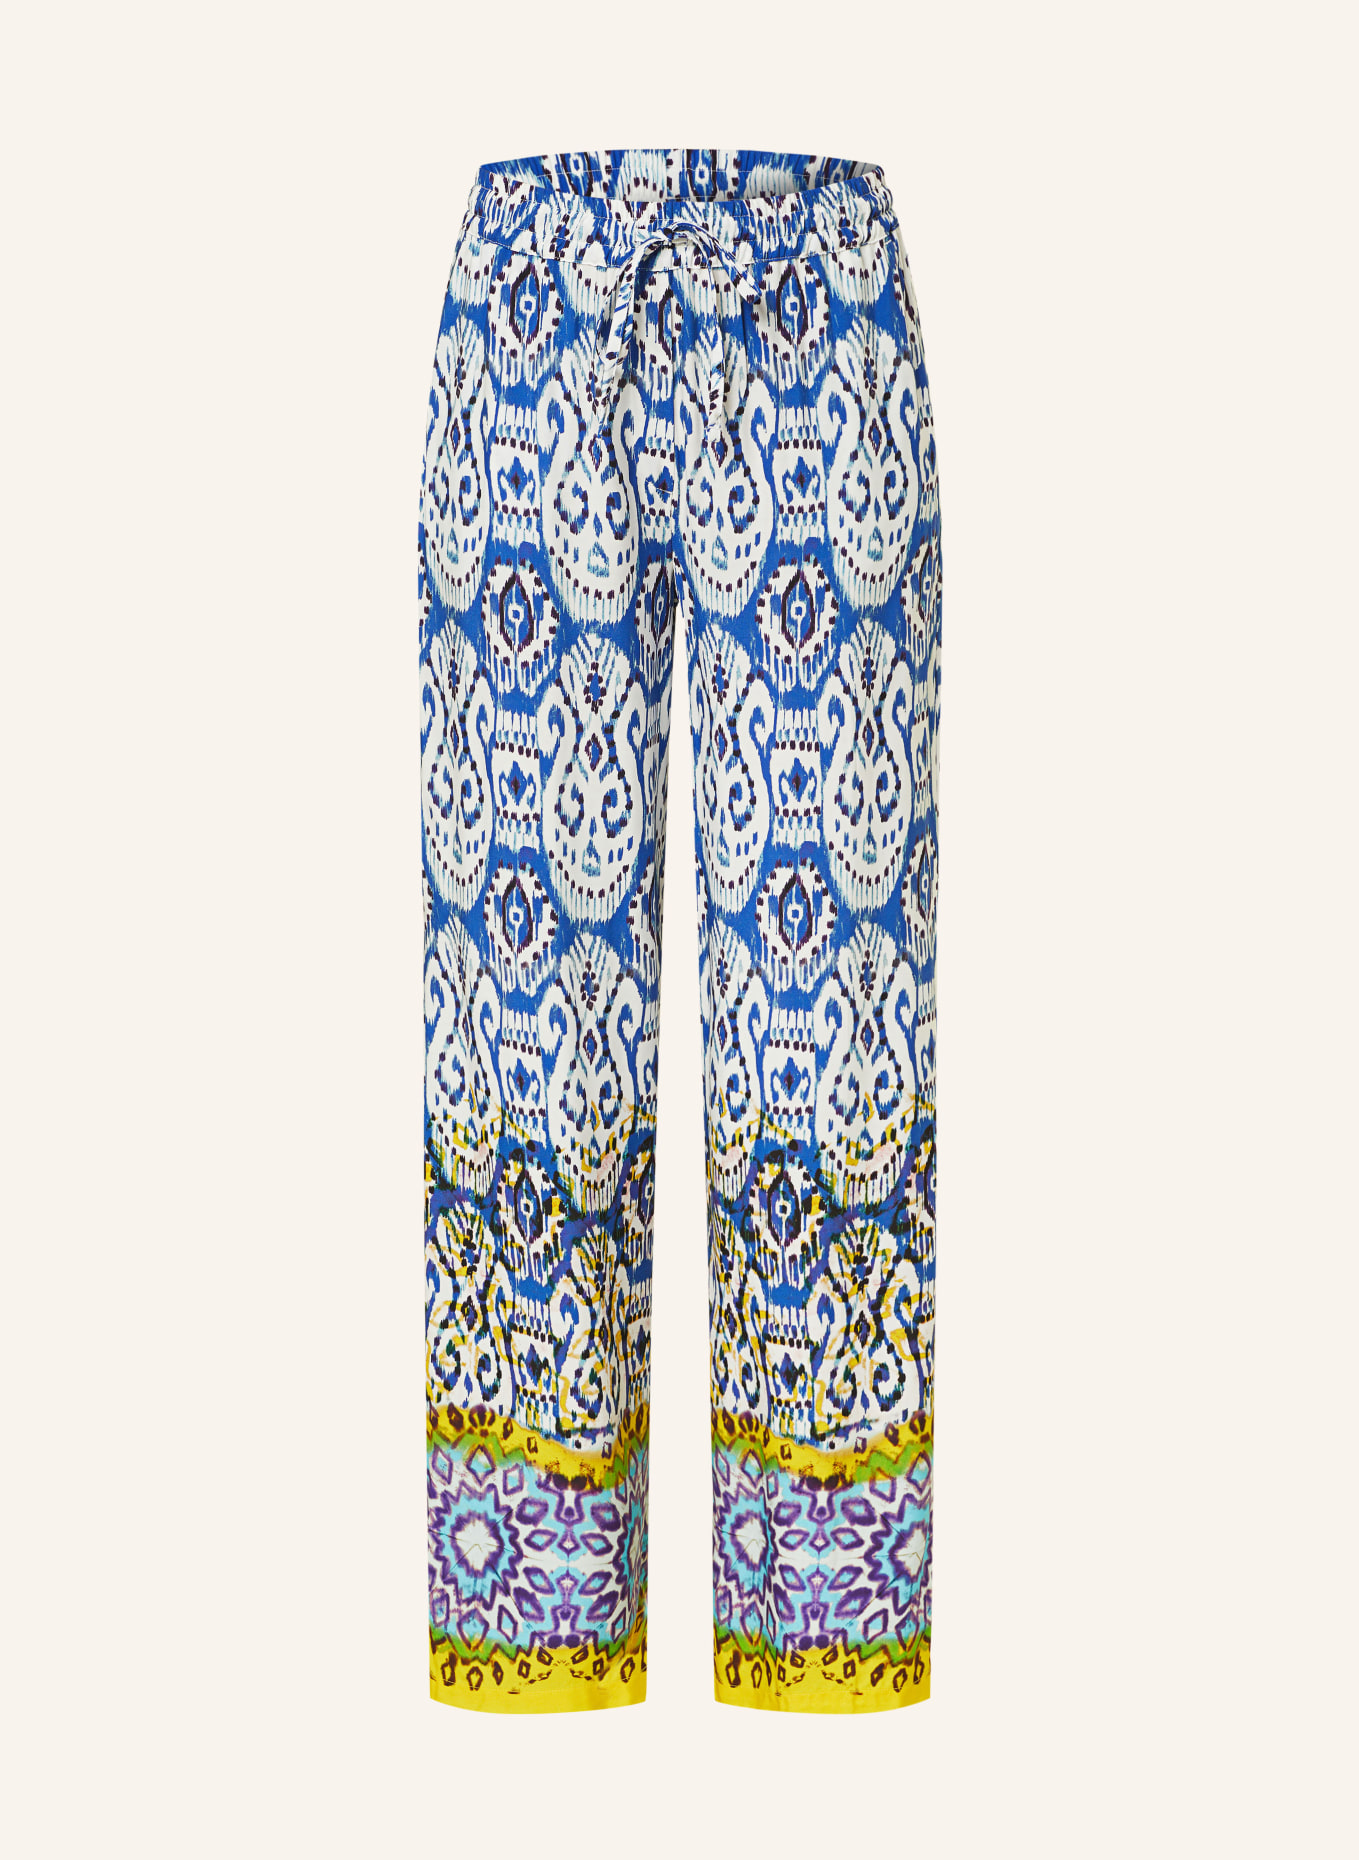 Emily VAN DEN BERGH Pants in jogger style, Color: BLUE/ WHITE/ YELLOW (Image 1)